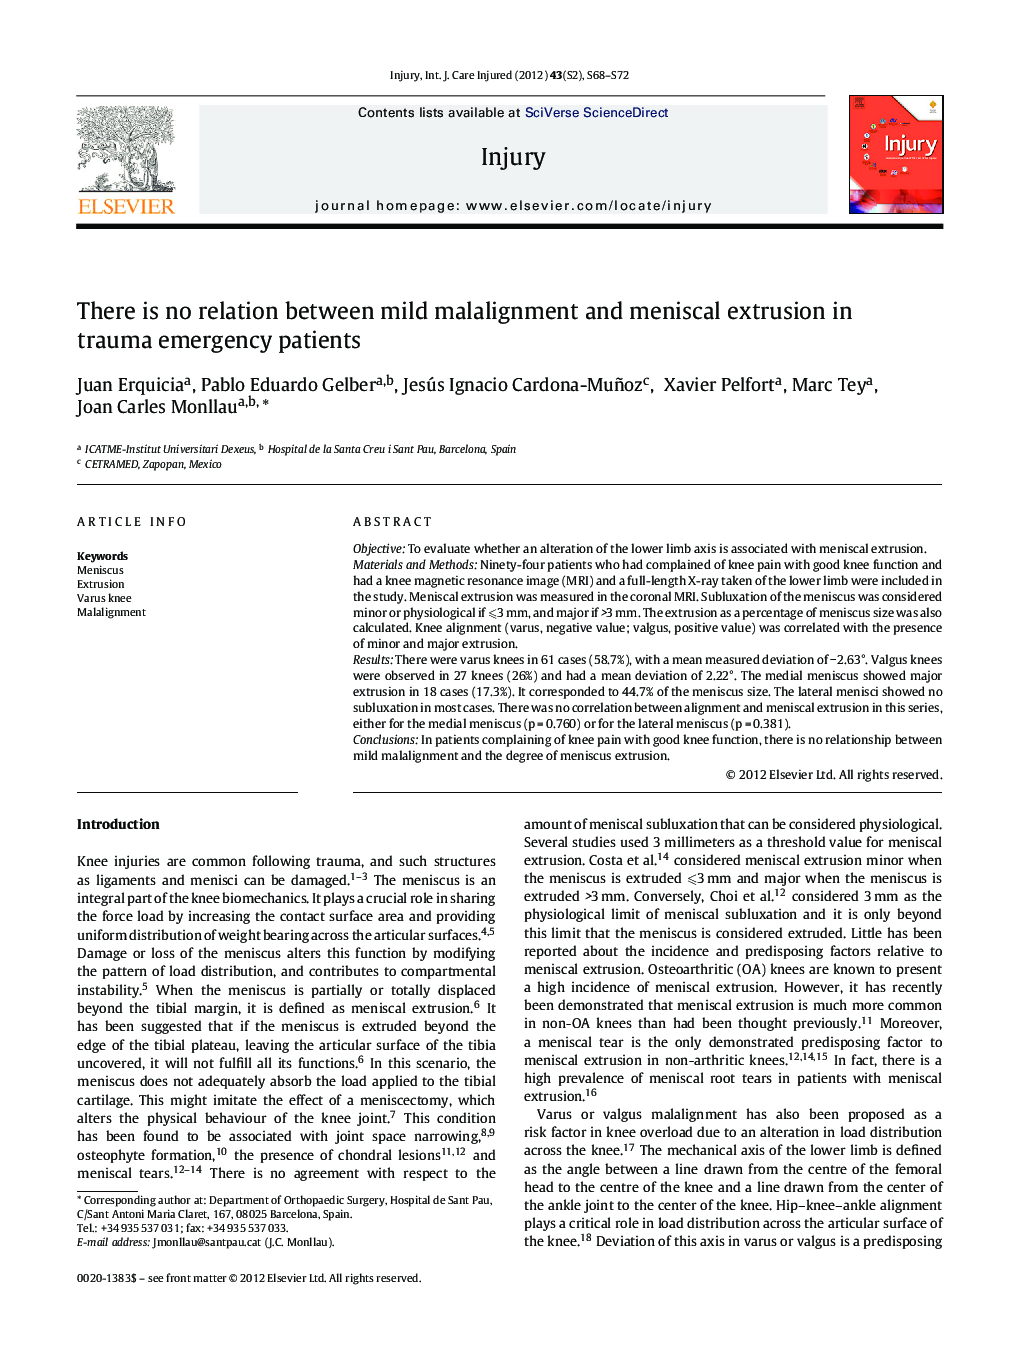 There is no relation between mild malalignment and meniscal extrusion in trauma emergency patients